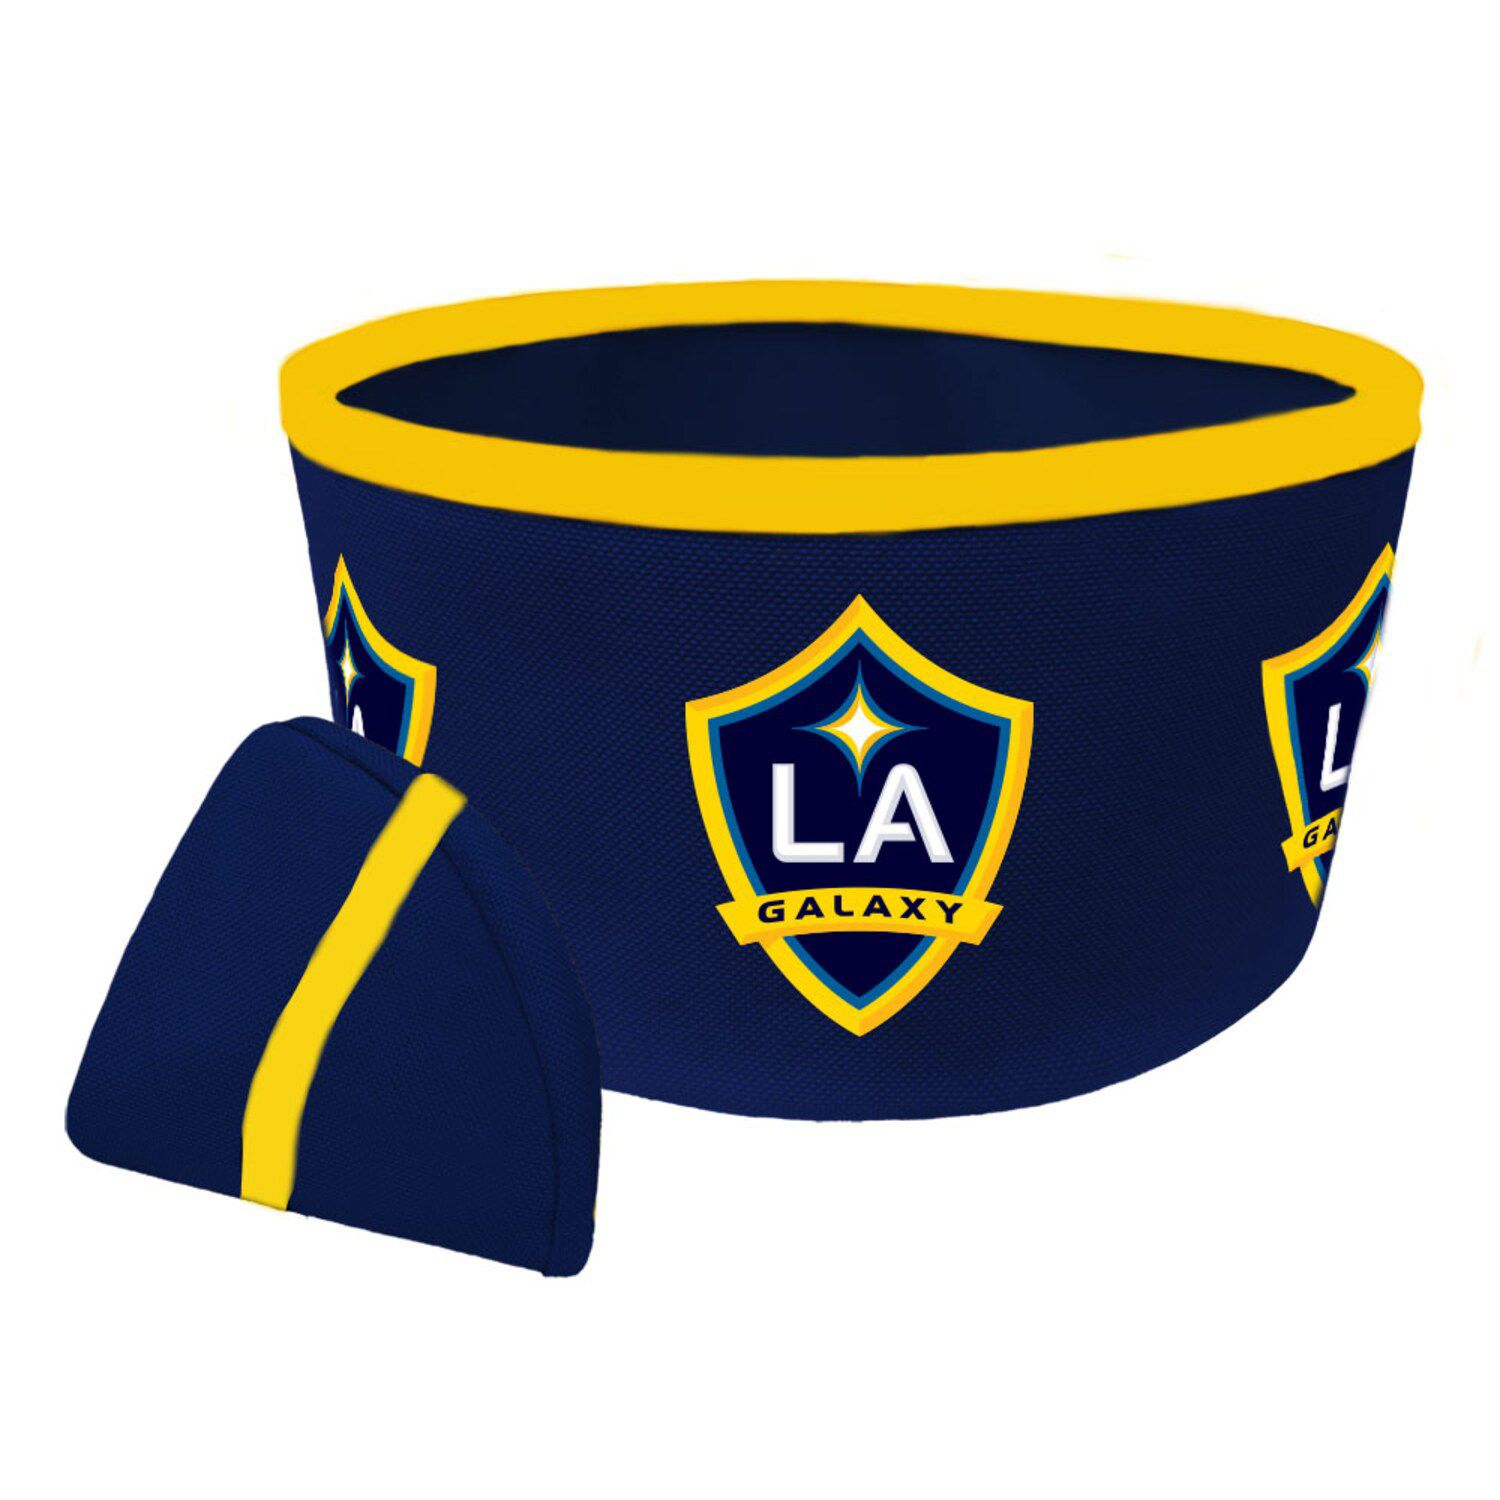 Image for Unbranded LA Galaxy Collapsible Travel Dog Bowl at Kohl's.